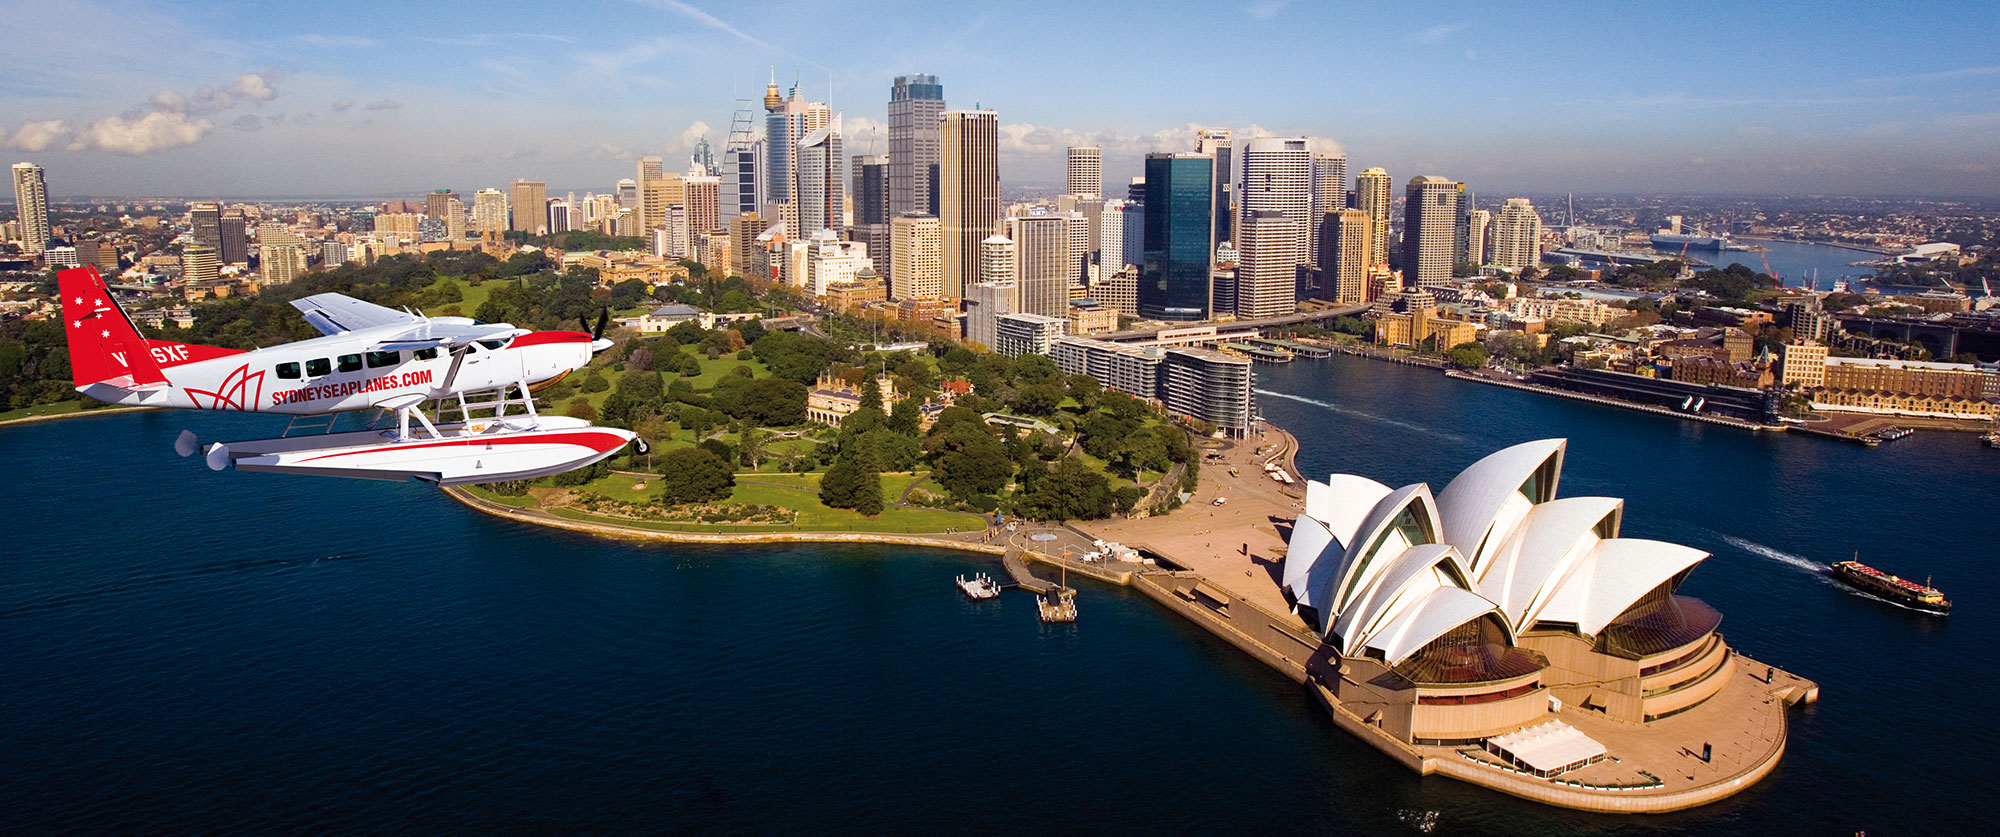 Australia Luxury Vacations: Cities and Reef Package - Sydney Seaplane Excursion to Gourmet Lunch